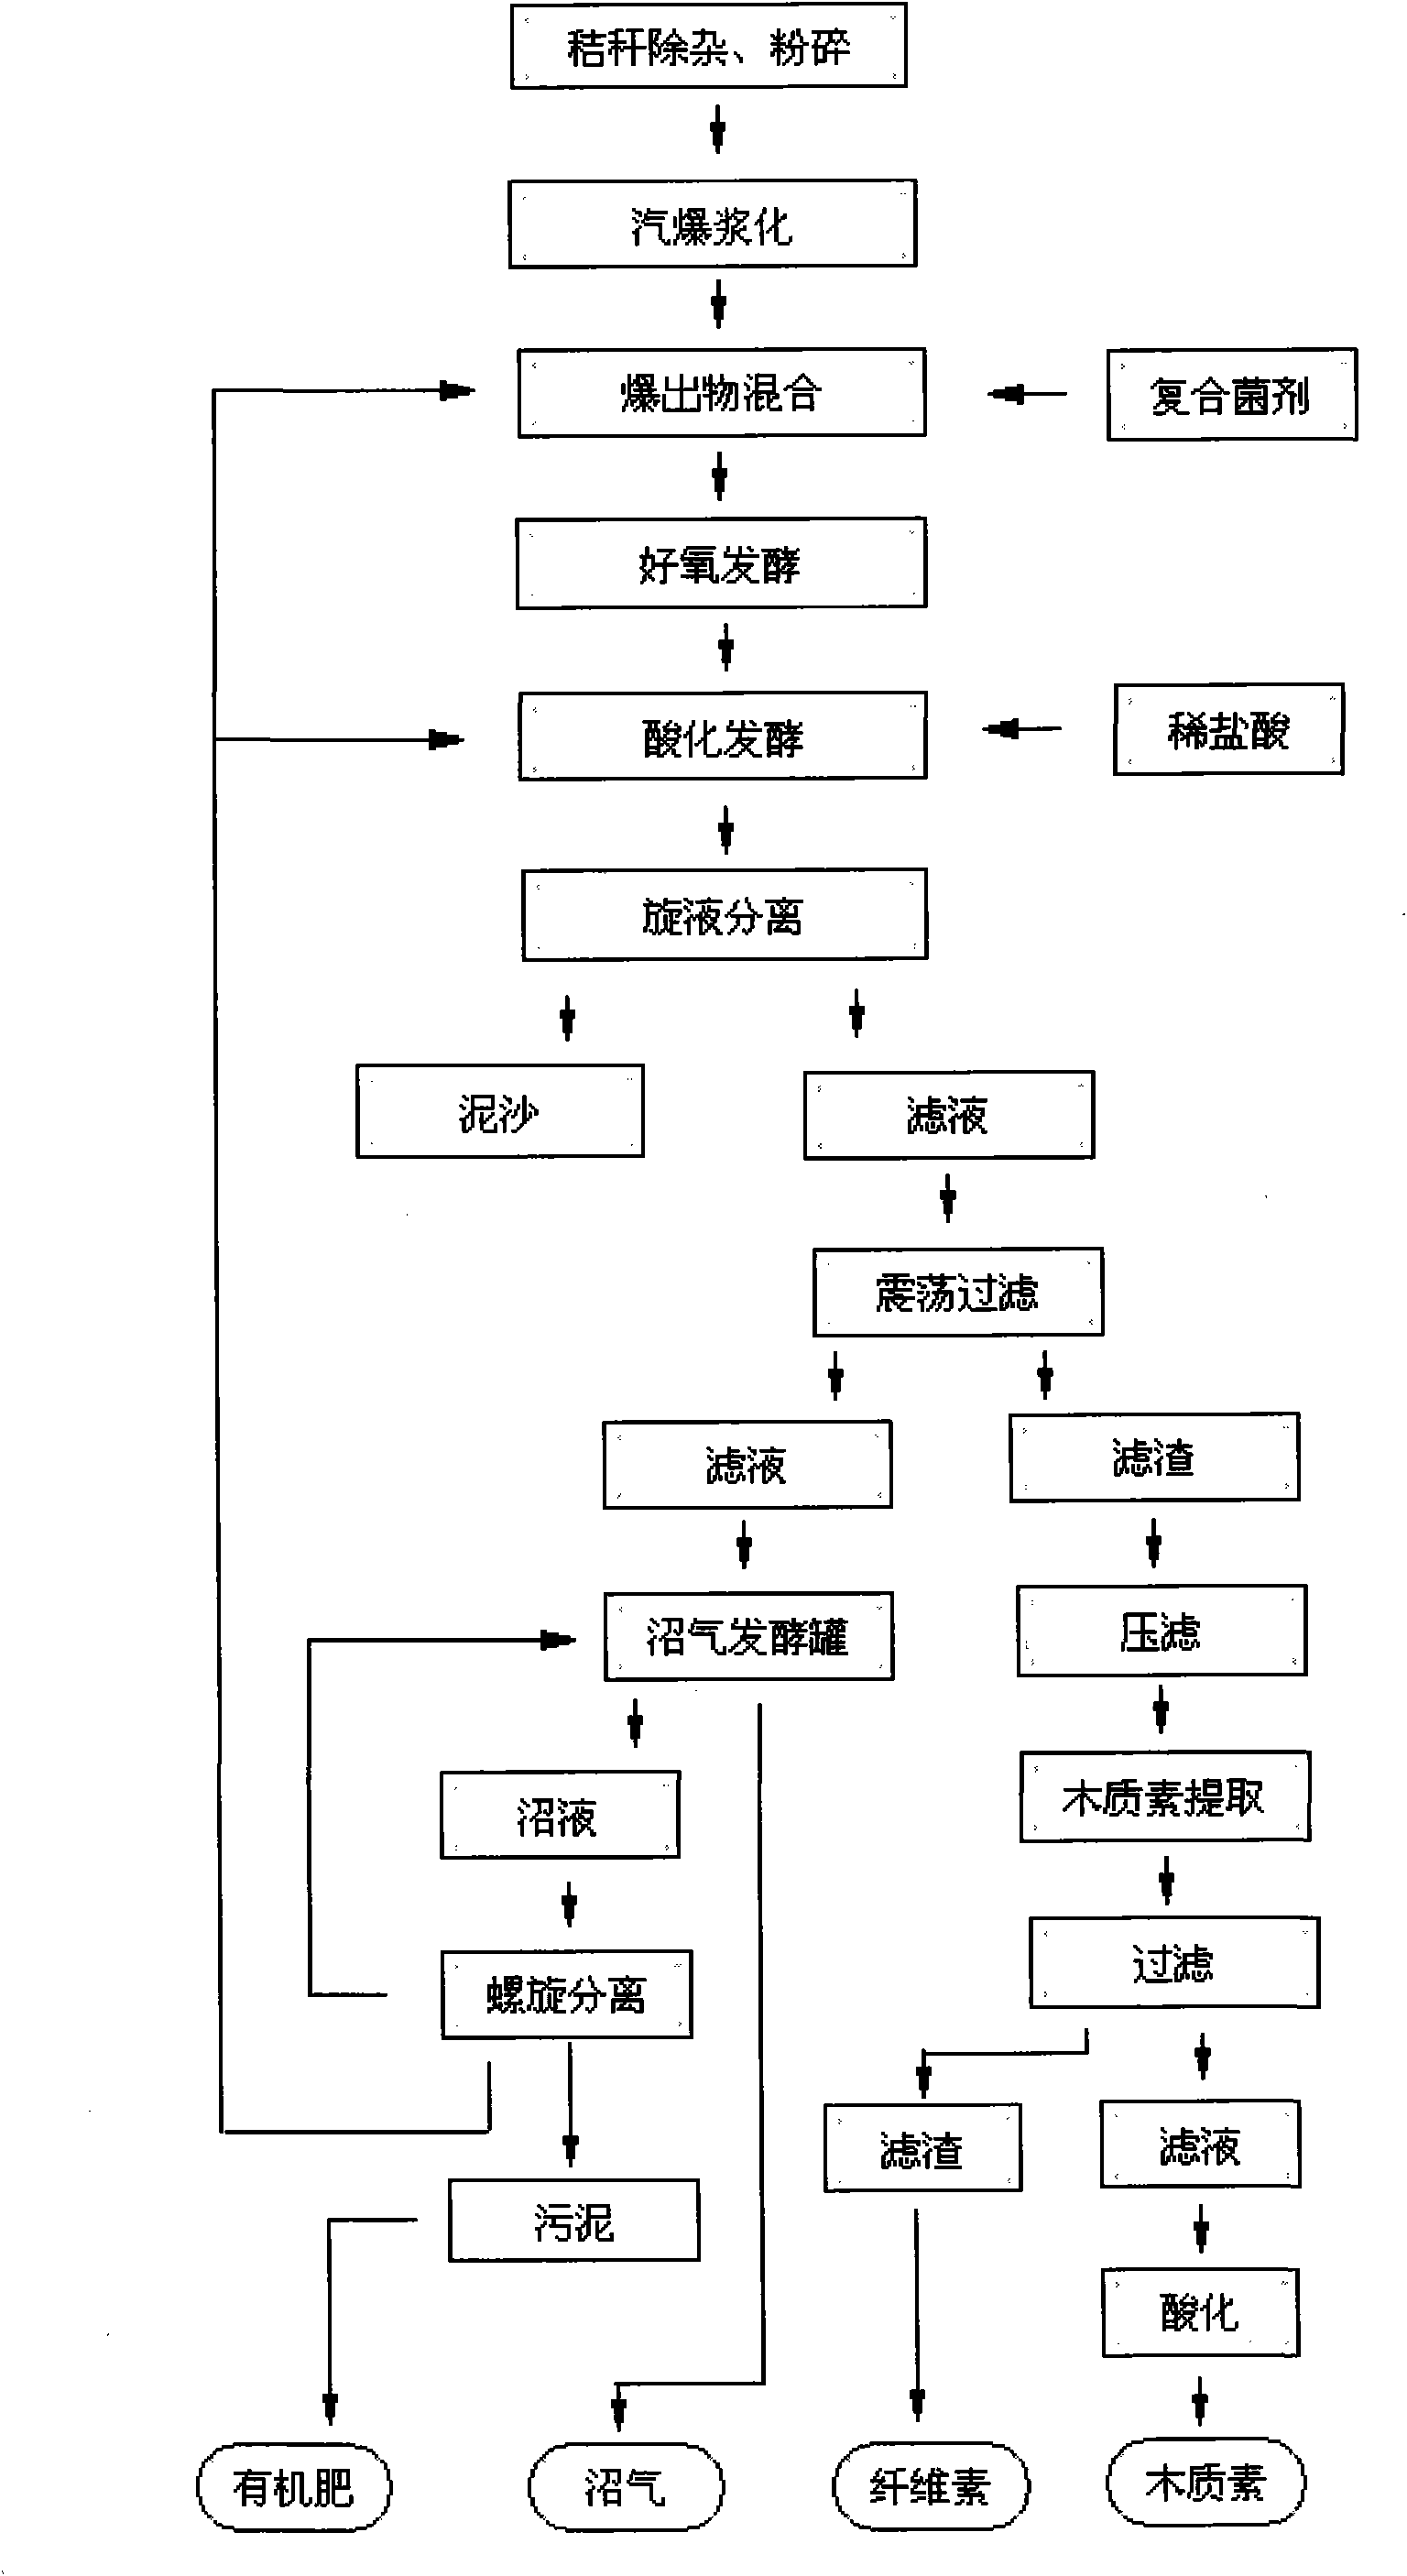 Soybean straw industrialization methane production and method for extracting cellulose and lignin